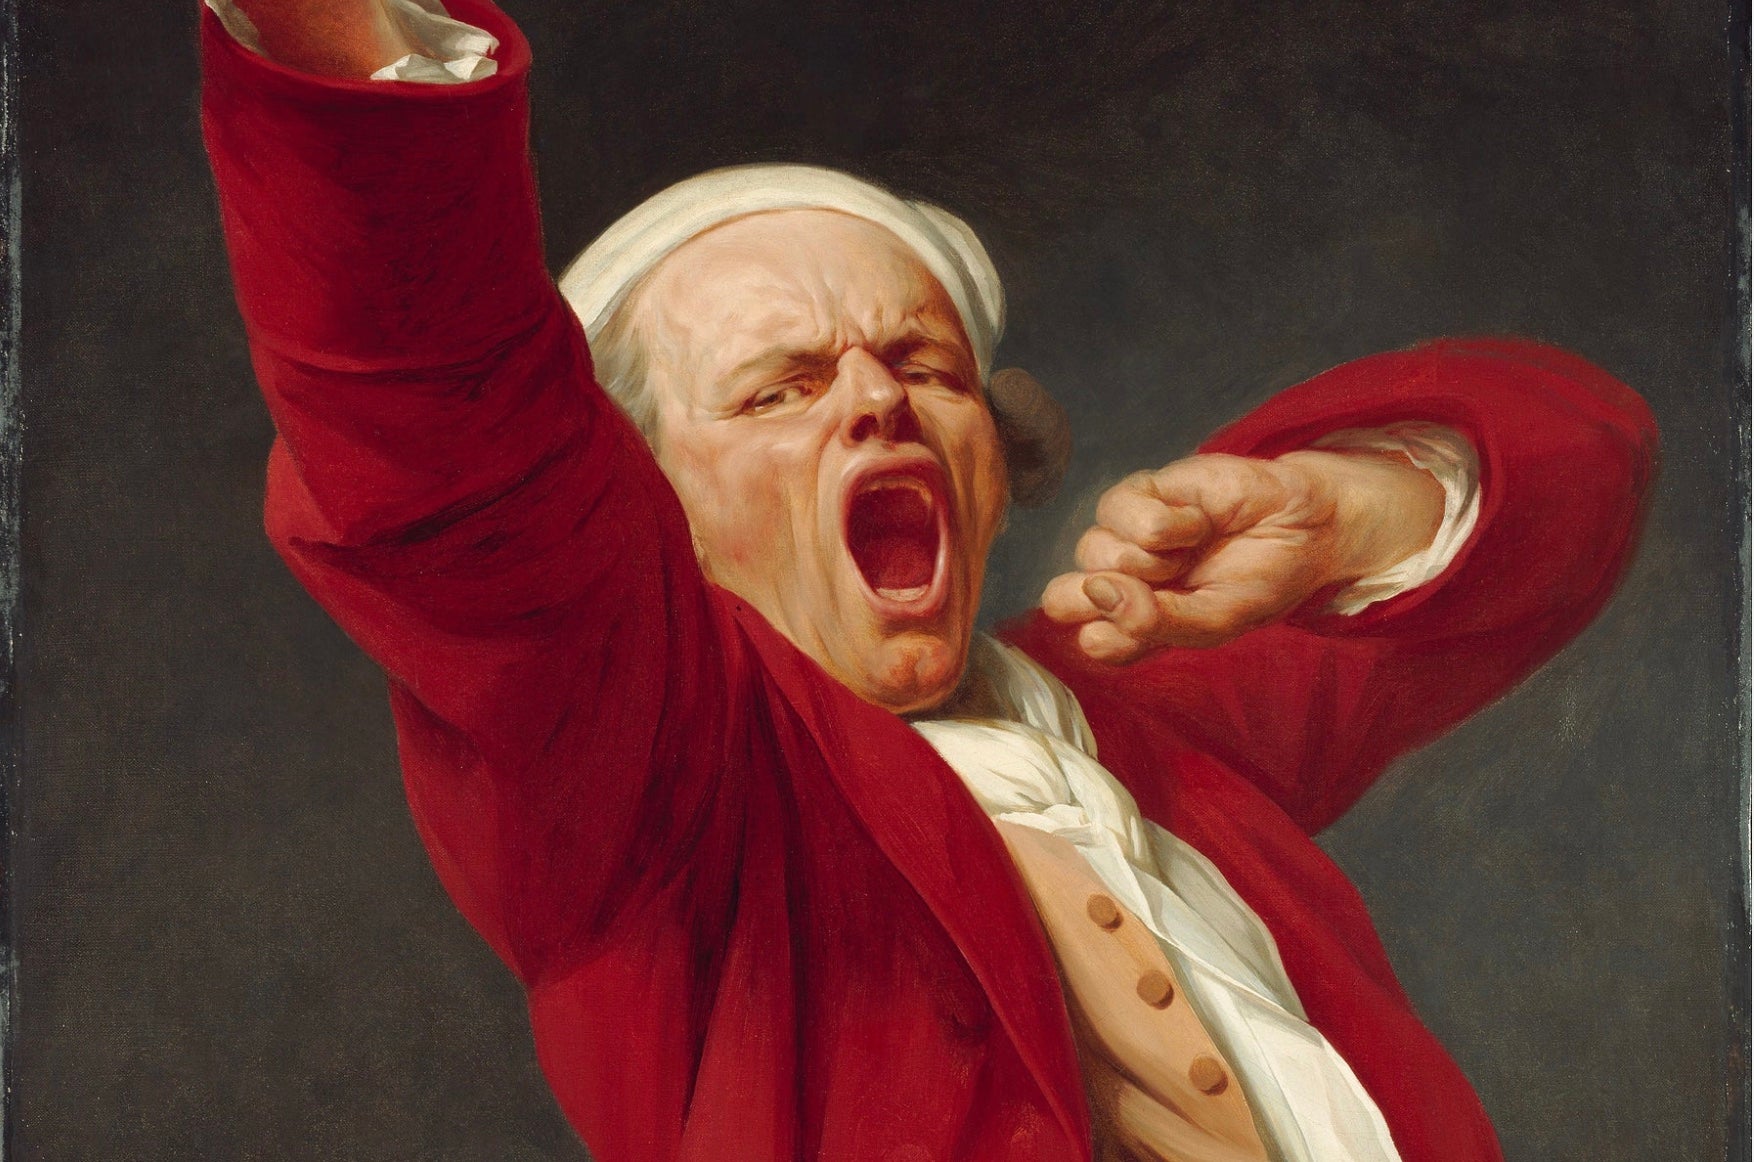 The Playful Self-Portraits and Comedic Art Style of Joseph Ducreux